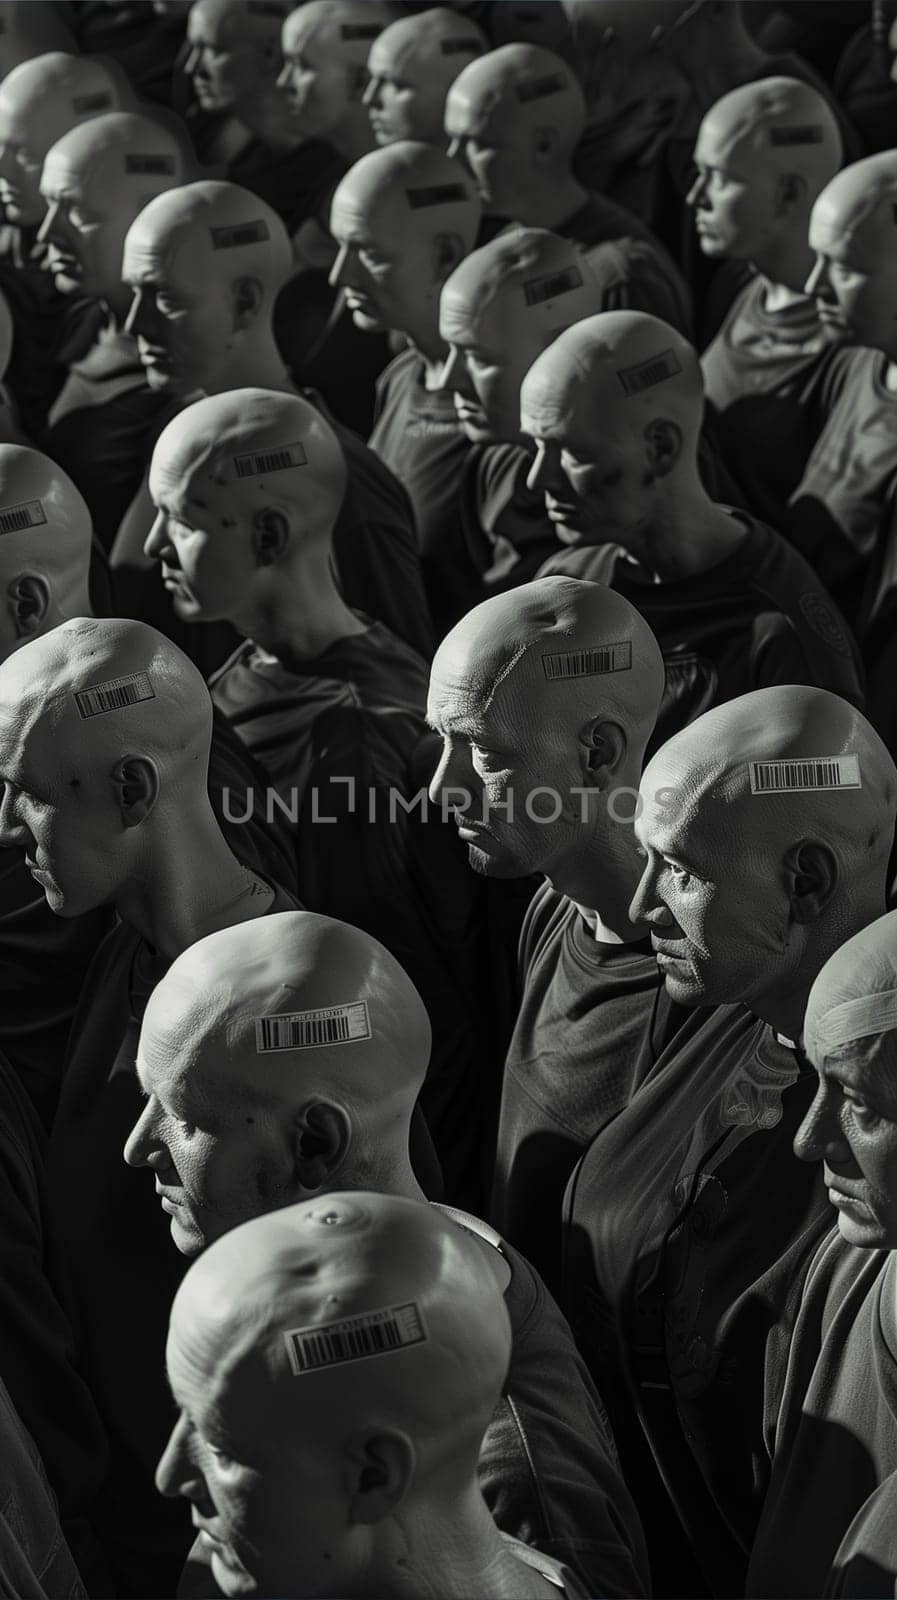 Large Gathering of Identical Bald Figures in Dark Attire Standing in Dim Light by Sd28DimoN_1976